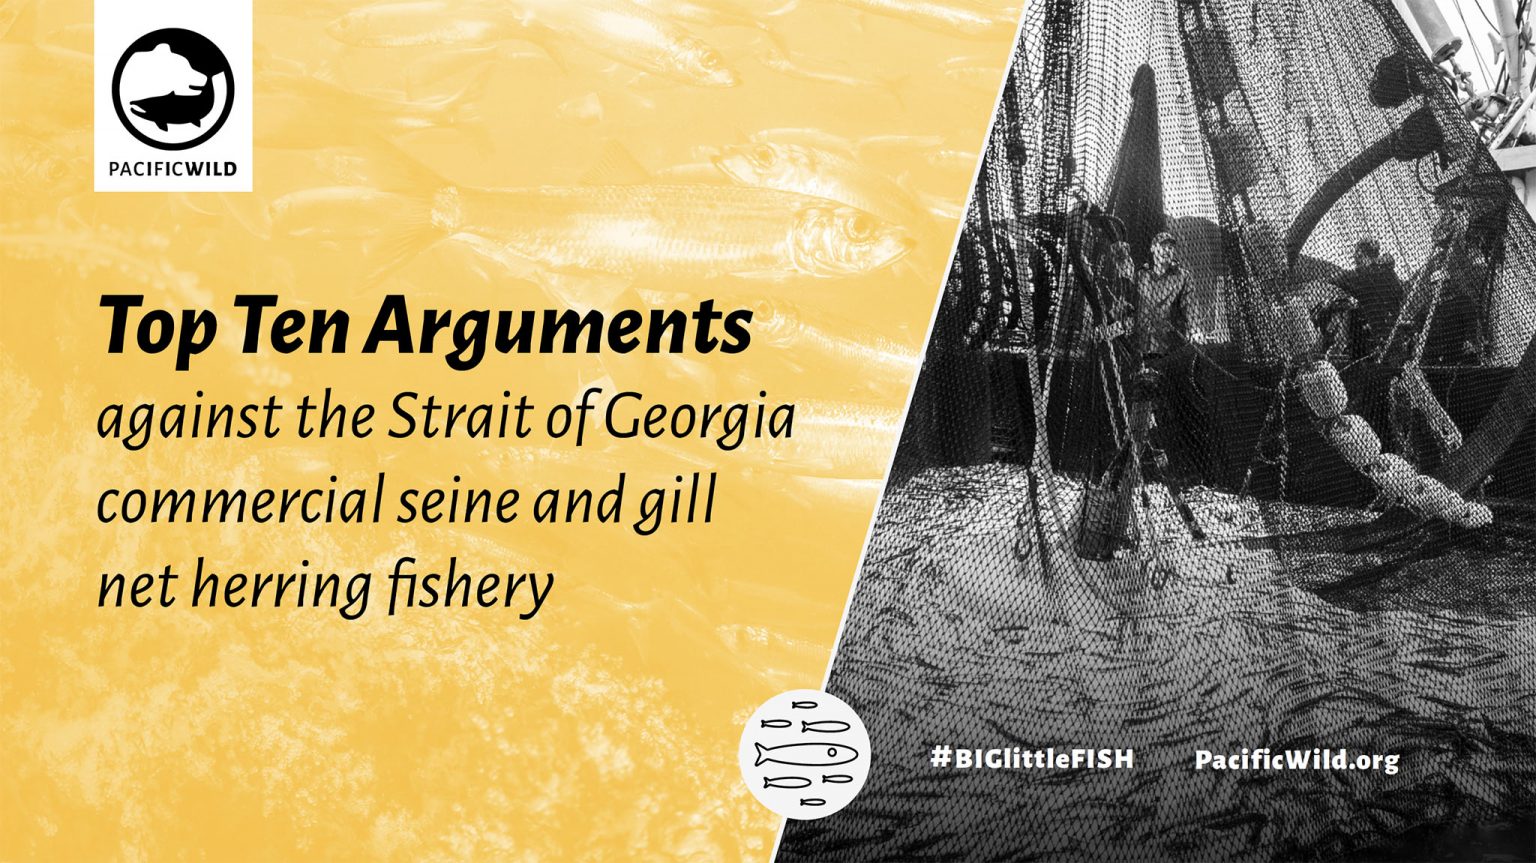 https://pacificwild.org/wp-content/uploads/2019/03/Top-Ten-Arguments-against-the-Strait-of-Georgia-herring-fishery